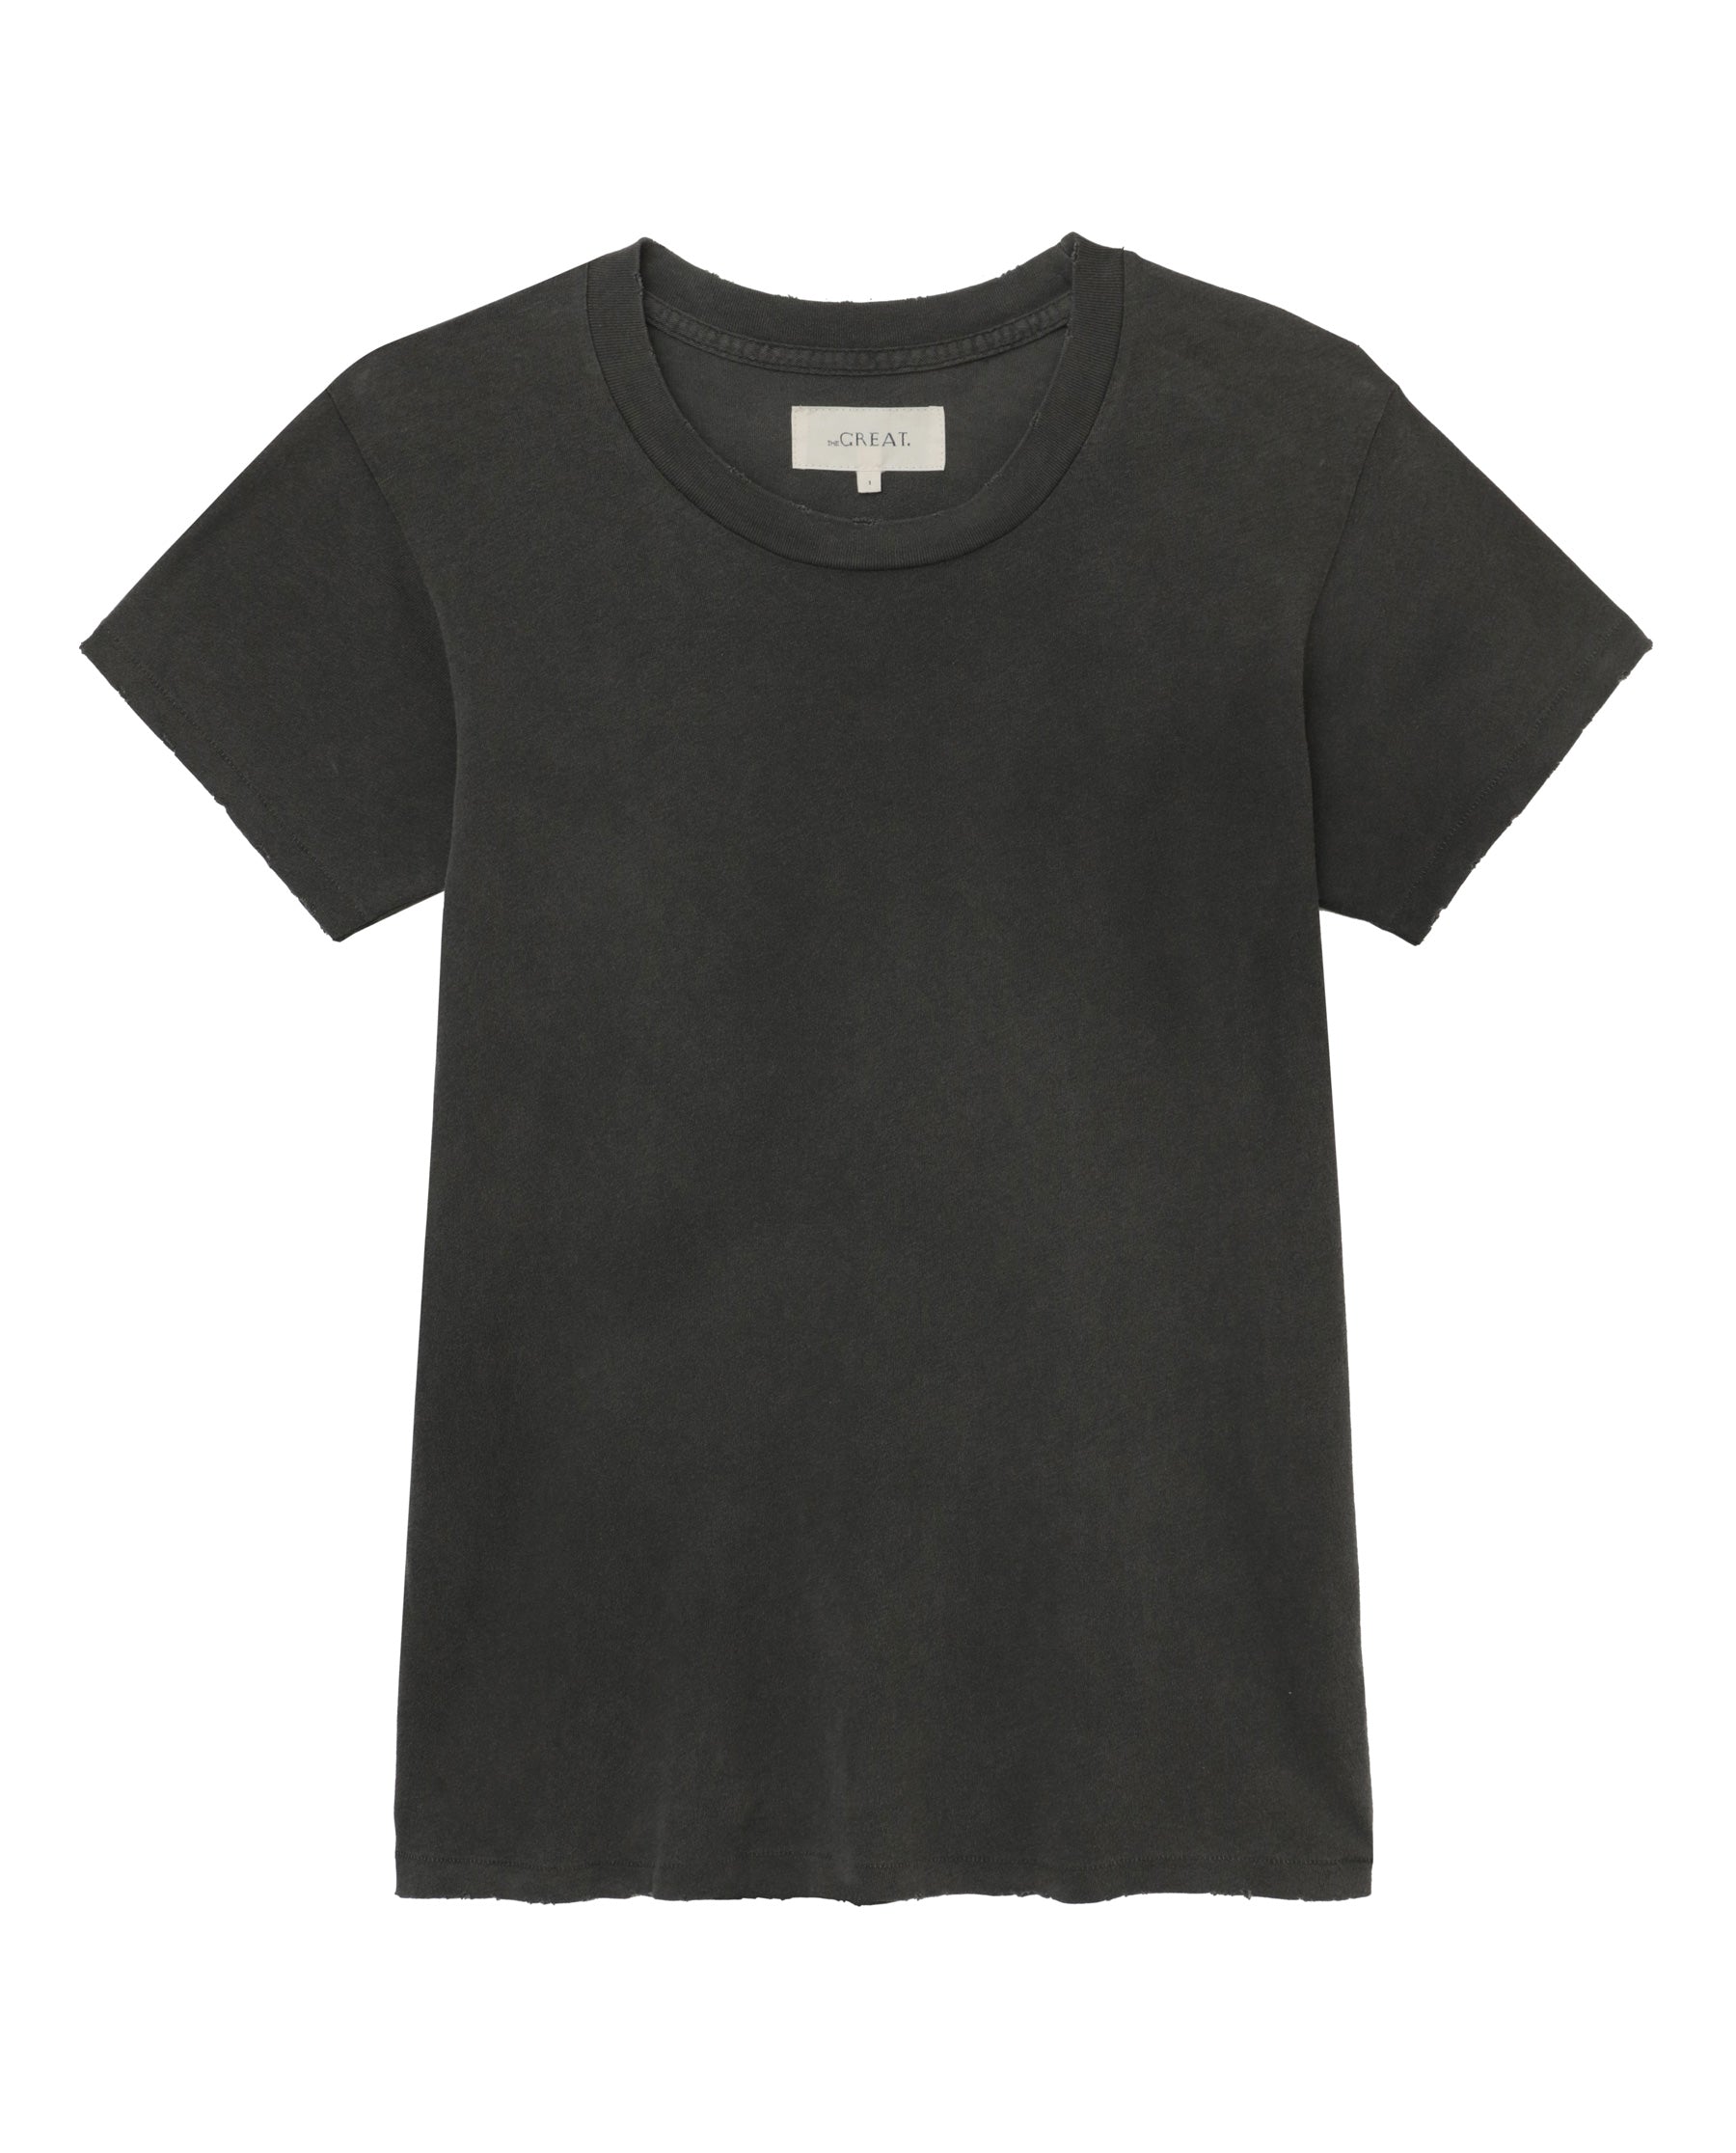 The Slim Tee. - Washed Black - THE GREAT. – The Great.